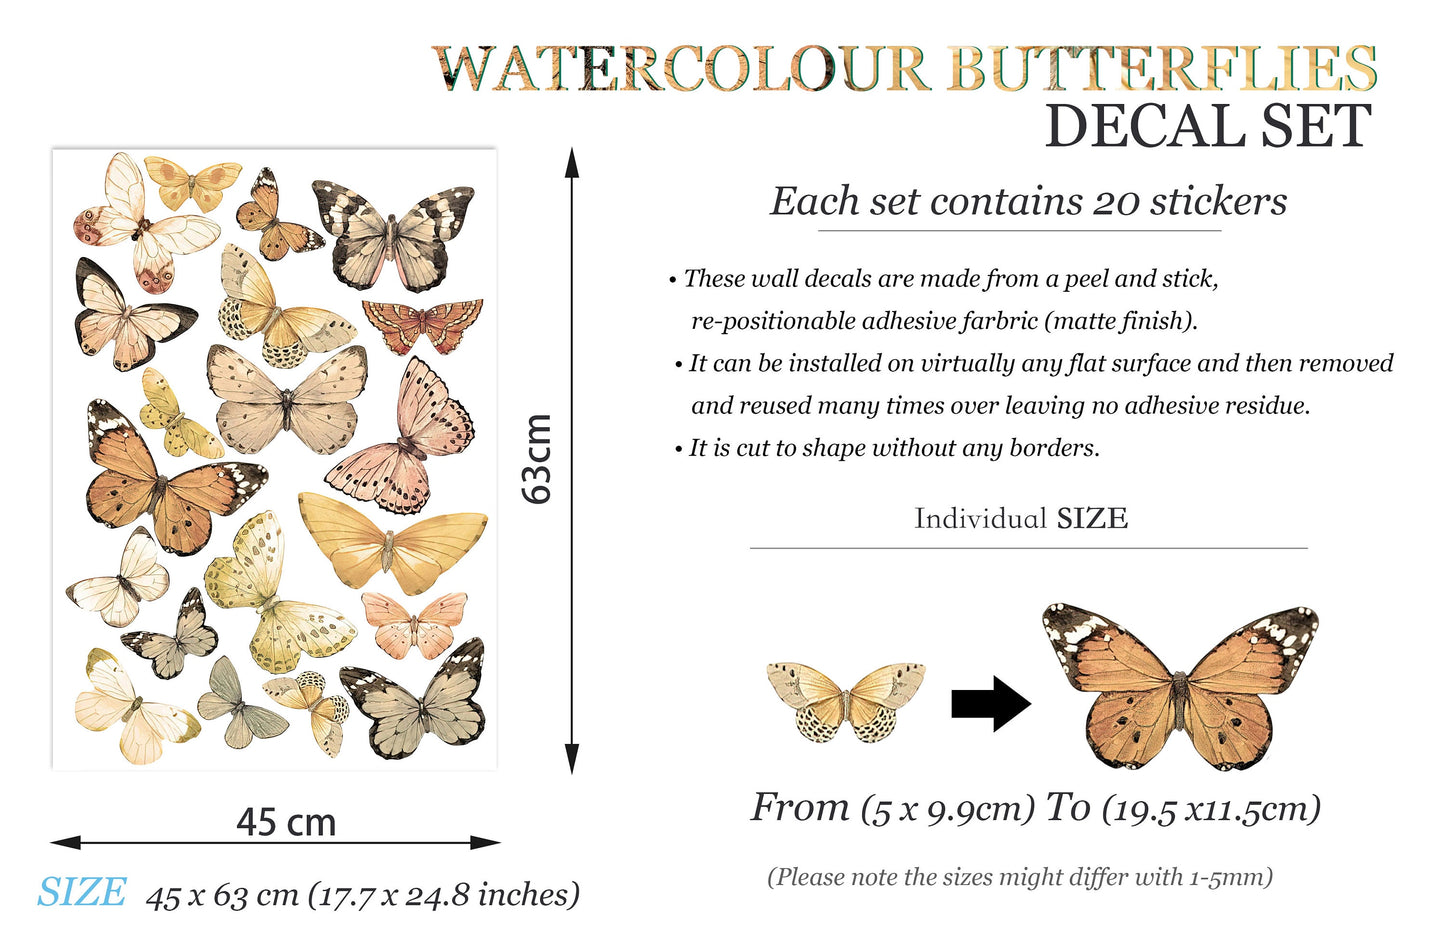 Elegant Mocha Butterfly Wall Decal Set - Assorted Coffee-toned Butterflies in Flight - Perfect for Girls' Room Decor - BR020